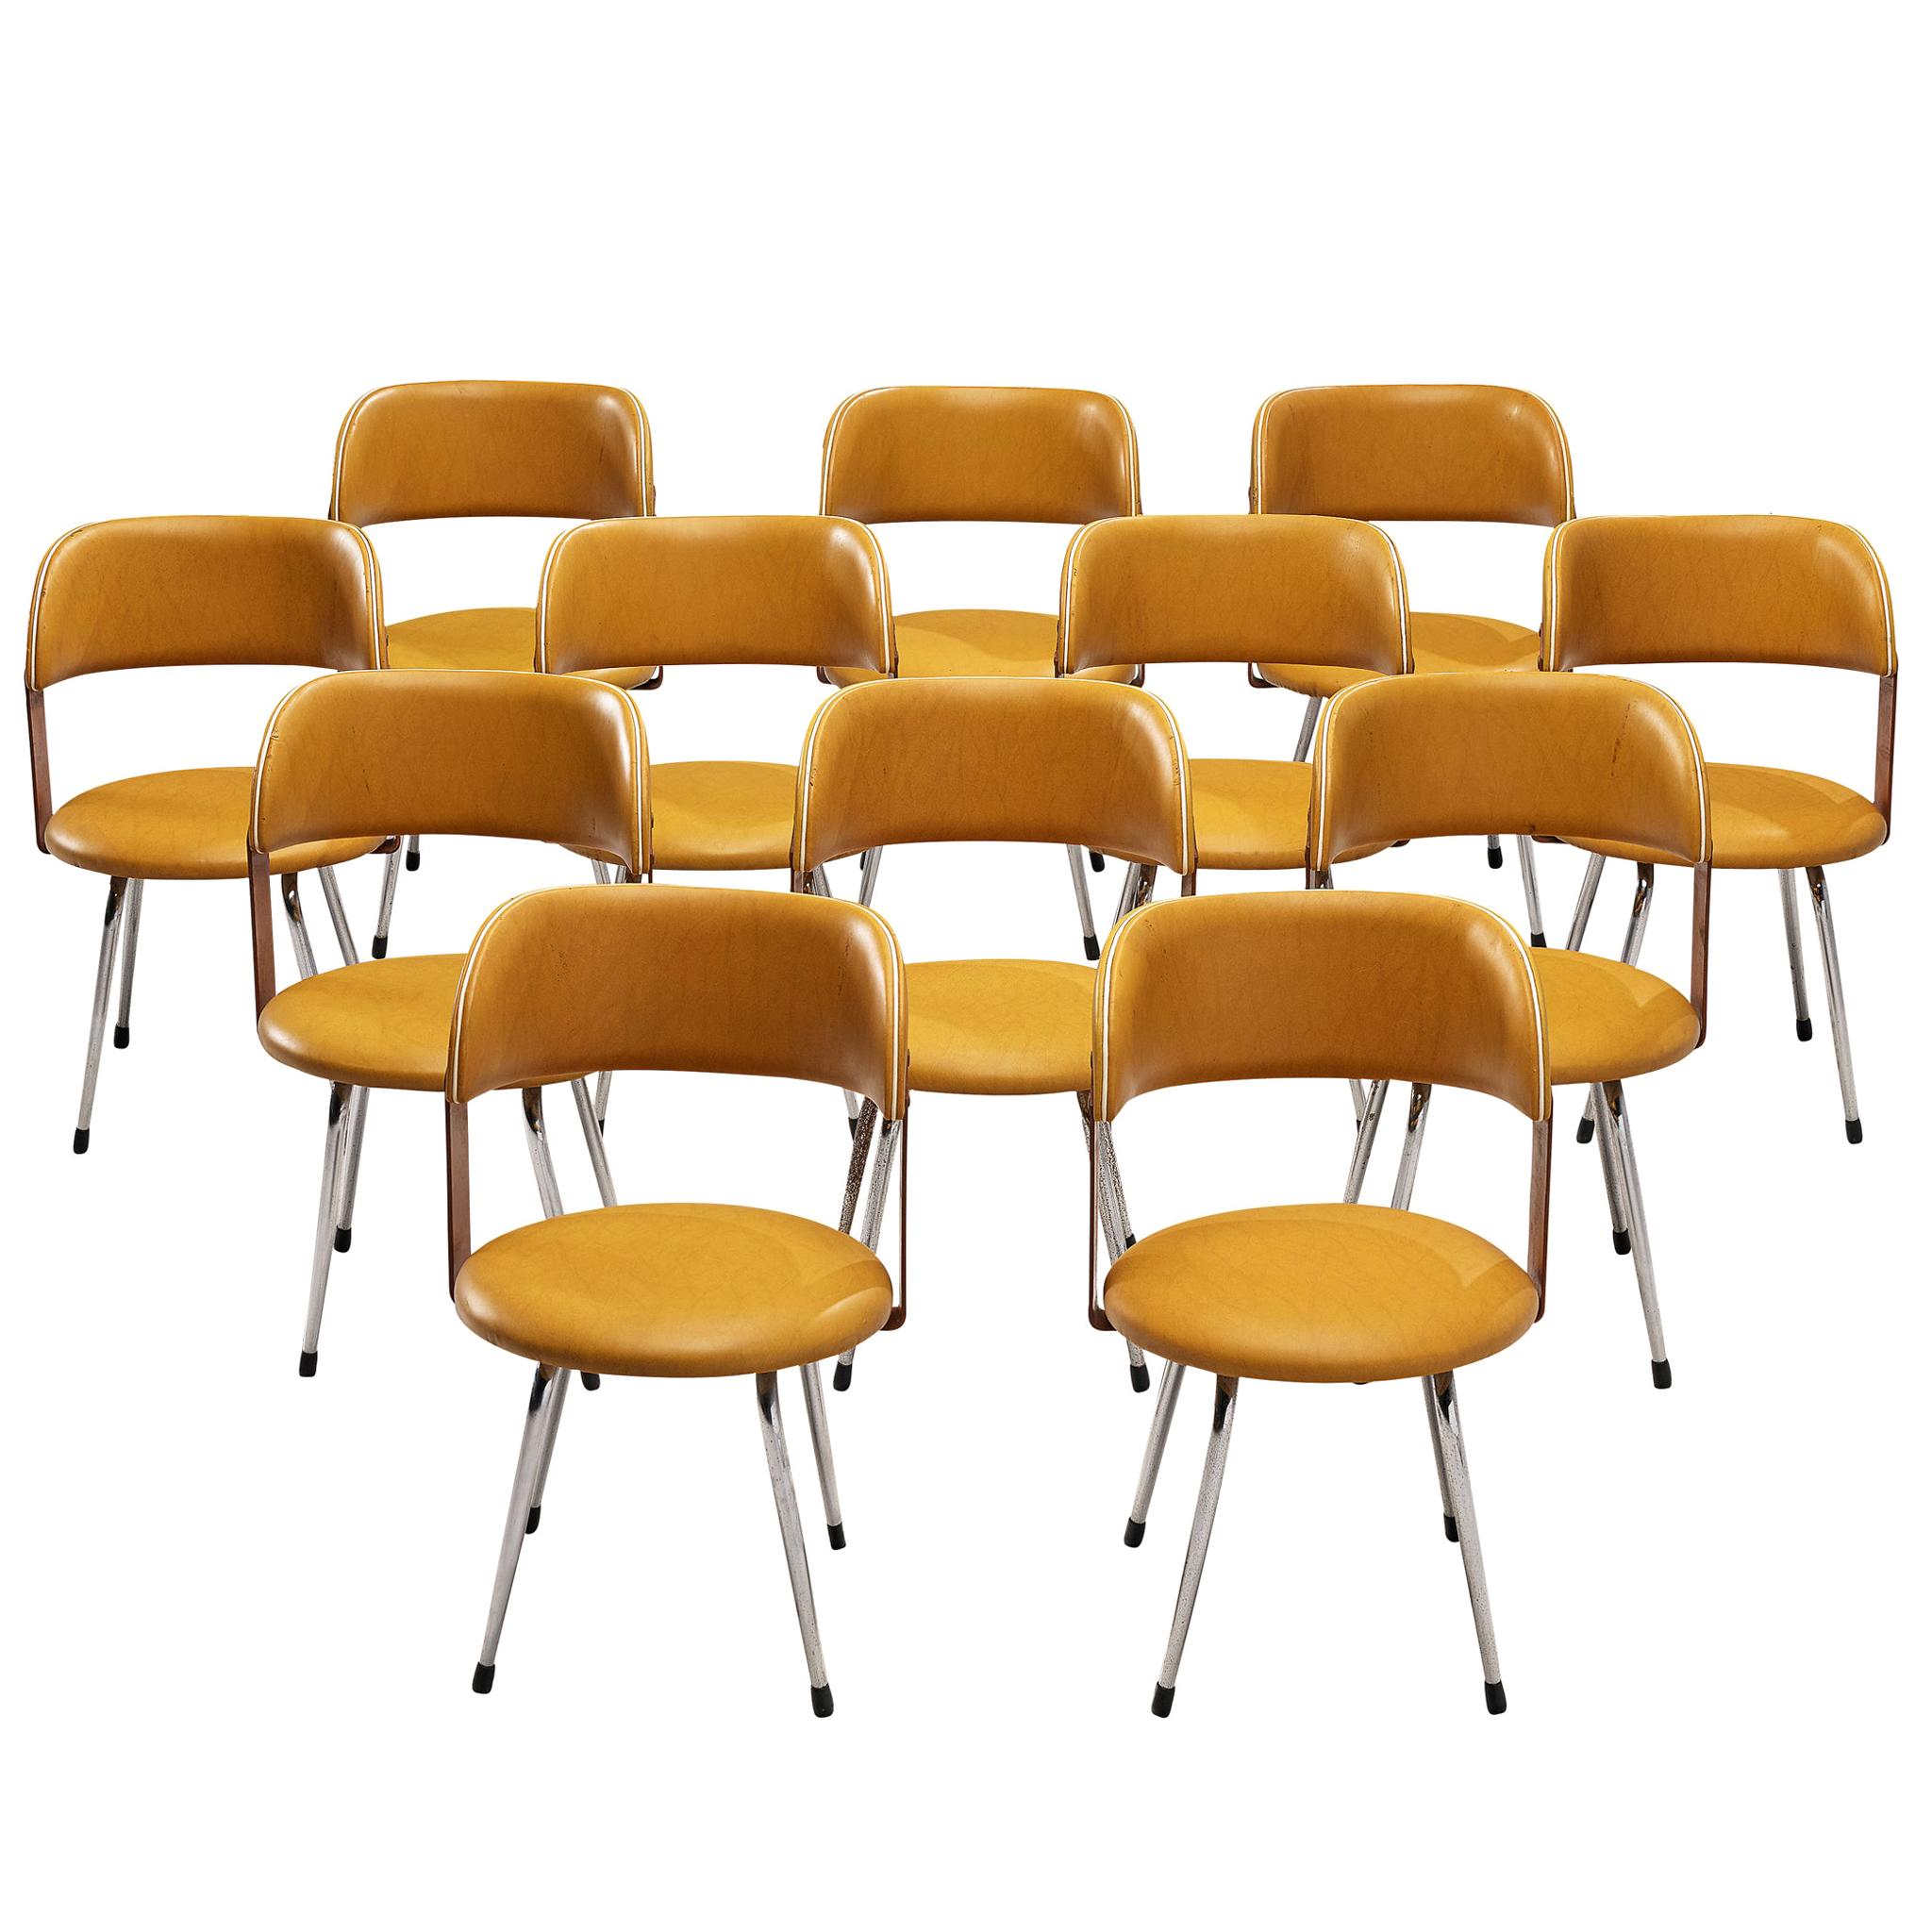 Large Set of 12 Italian Dining Chairs in Leatherette and Metal, 1970s